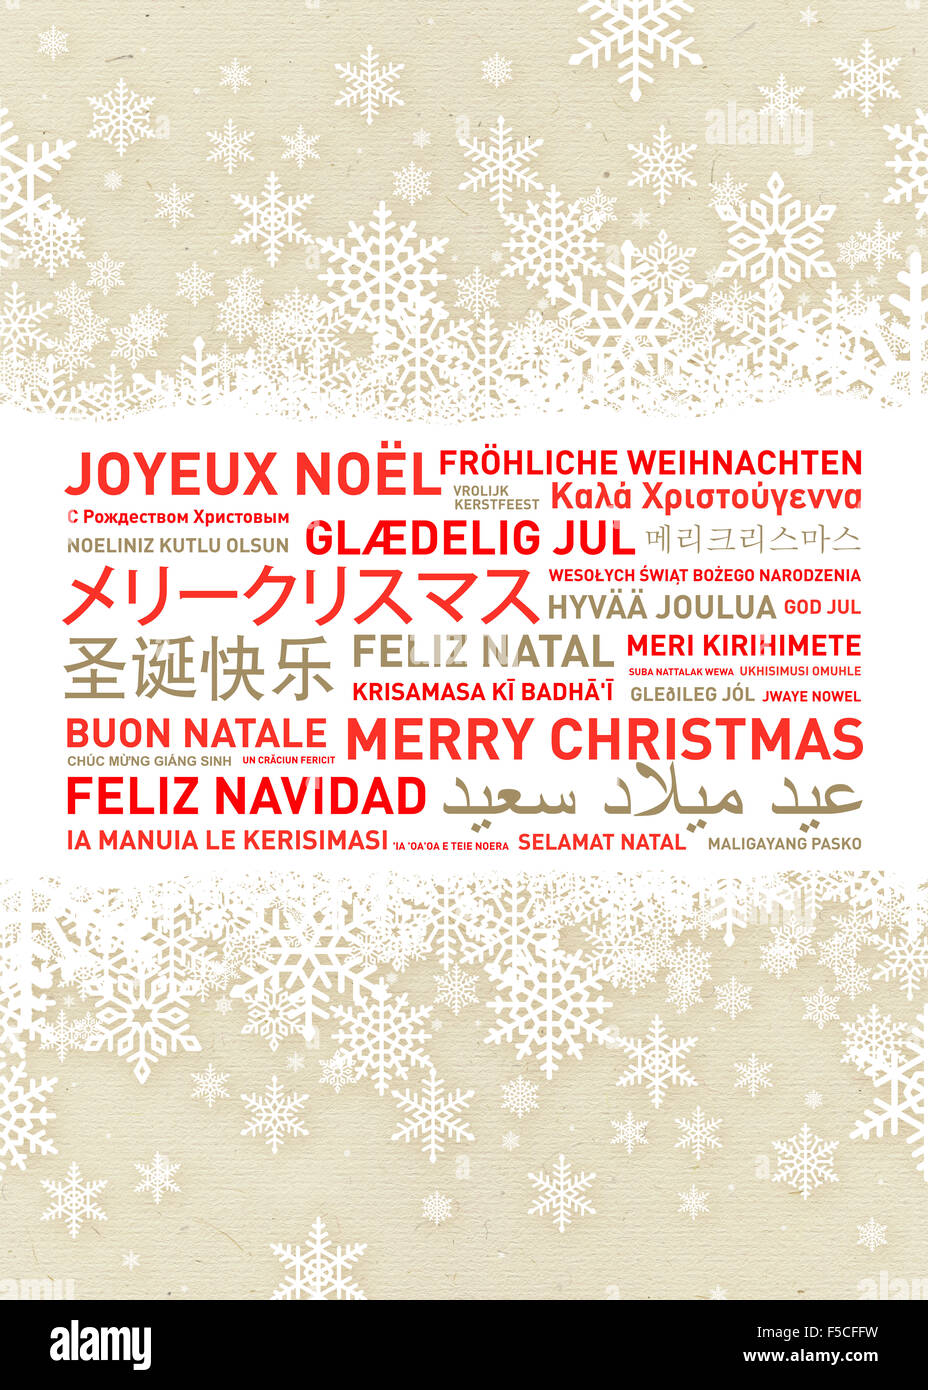 Merry christmas from the world. Different languages celebration card Stock Photo